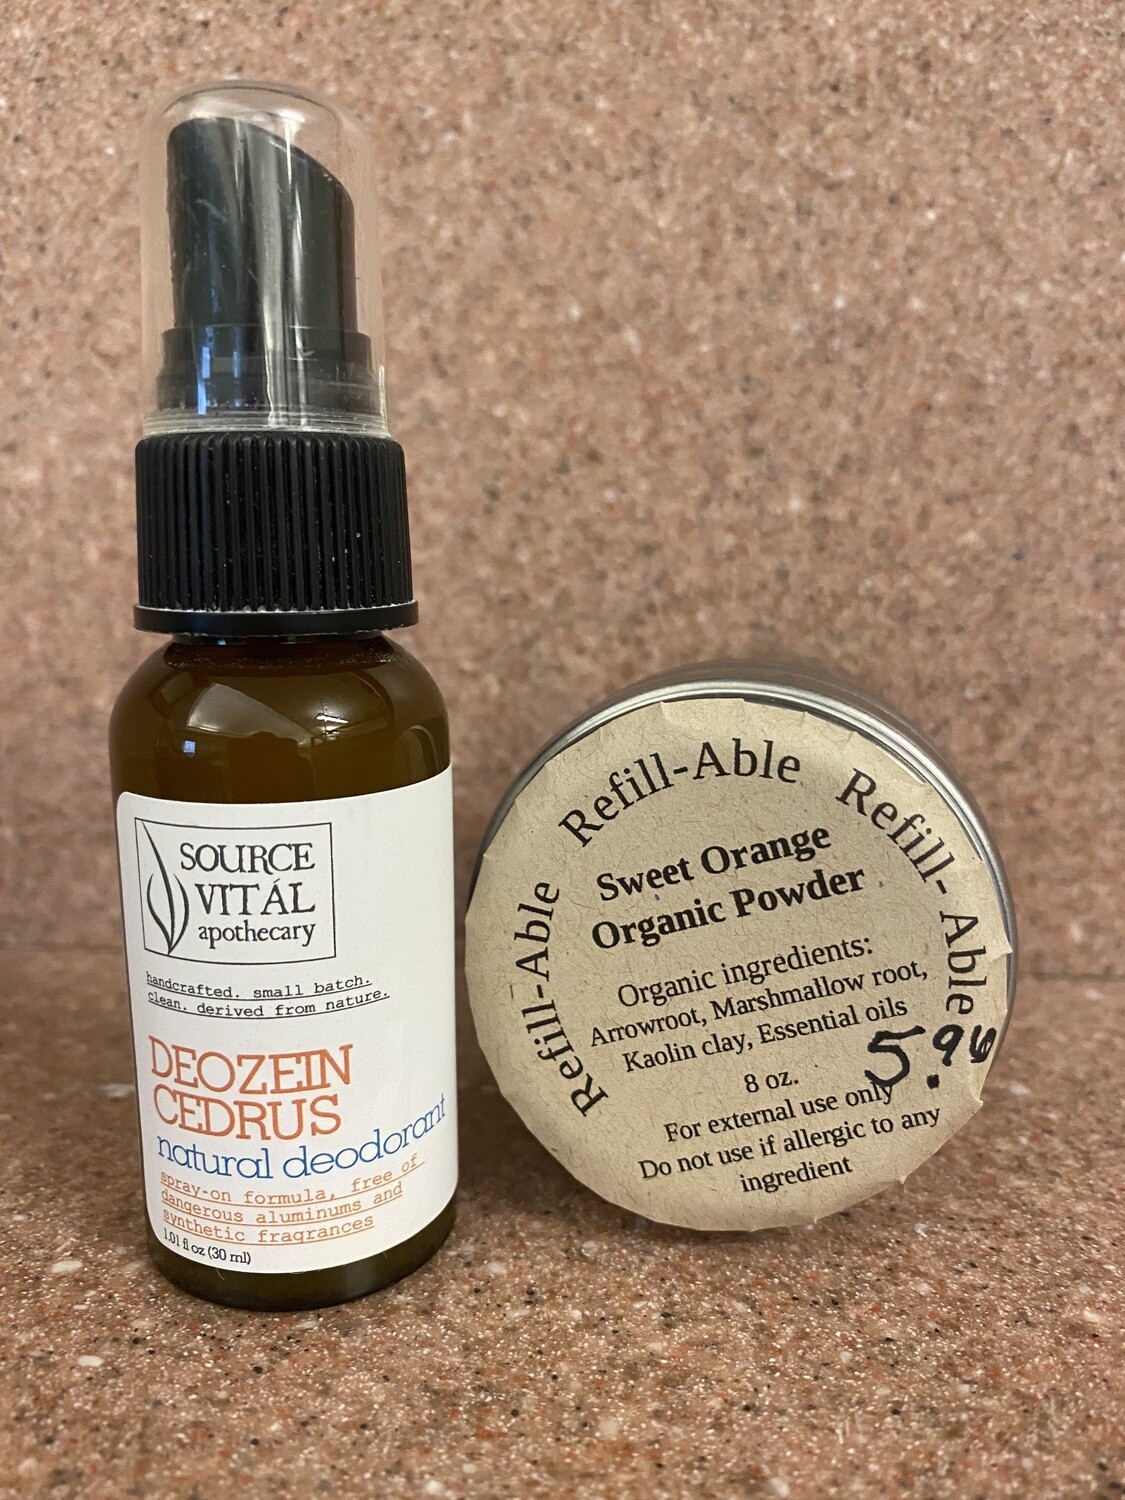 Source Vital Apothecary
Deozein Natural Deodorant
Assorted Scents